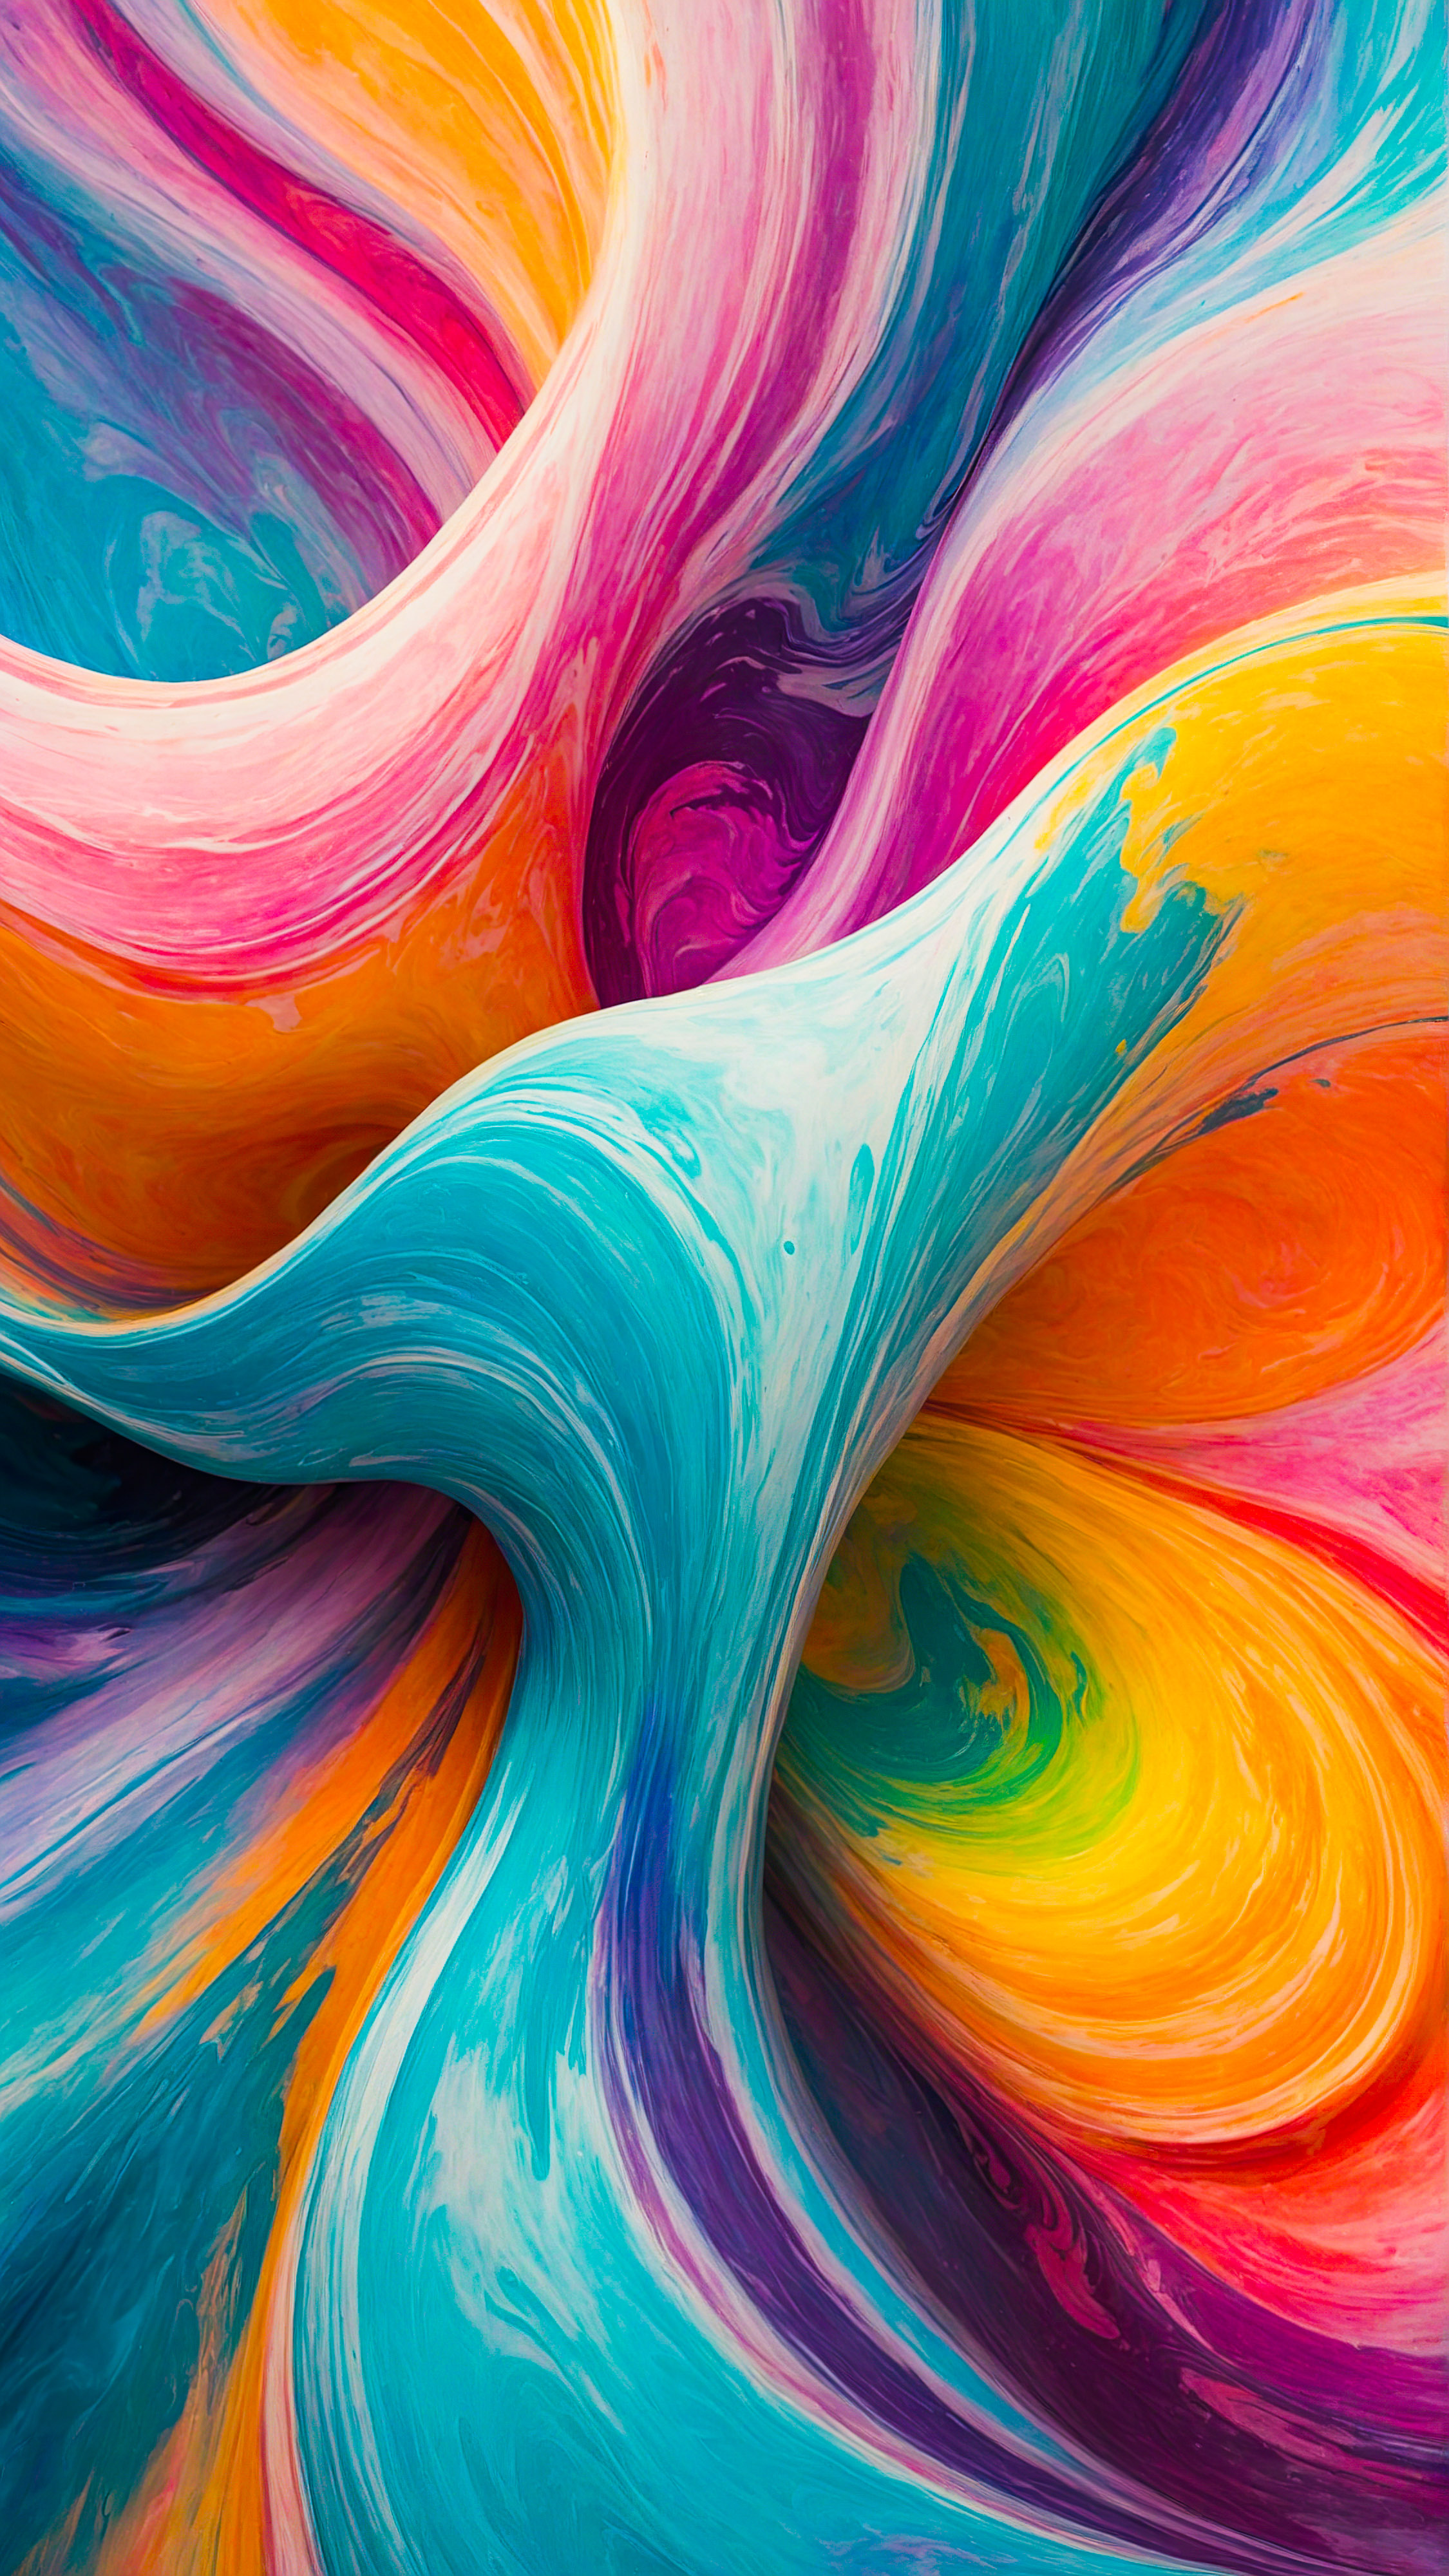 Enjoy the beauty and style of our cool 4K iPhone wallpapers, featuring a vibrant mix of pastel colors swirled together, creating an abstract and visually appealing pattern that adds a splash of color to your day.